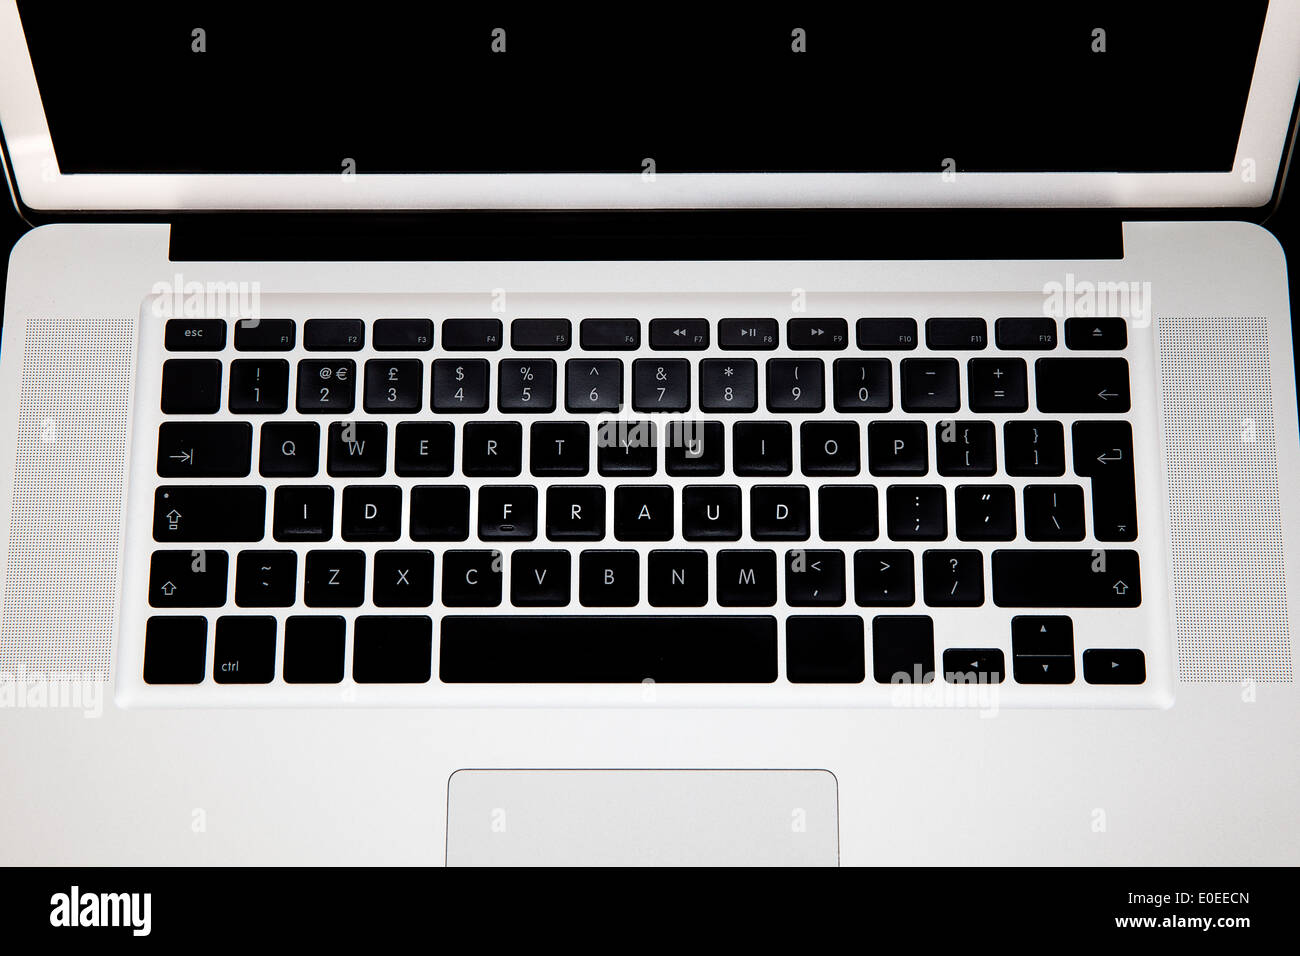 Computer keyboard with word spelled out, I.D. Fraud Stock Photo